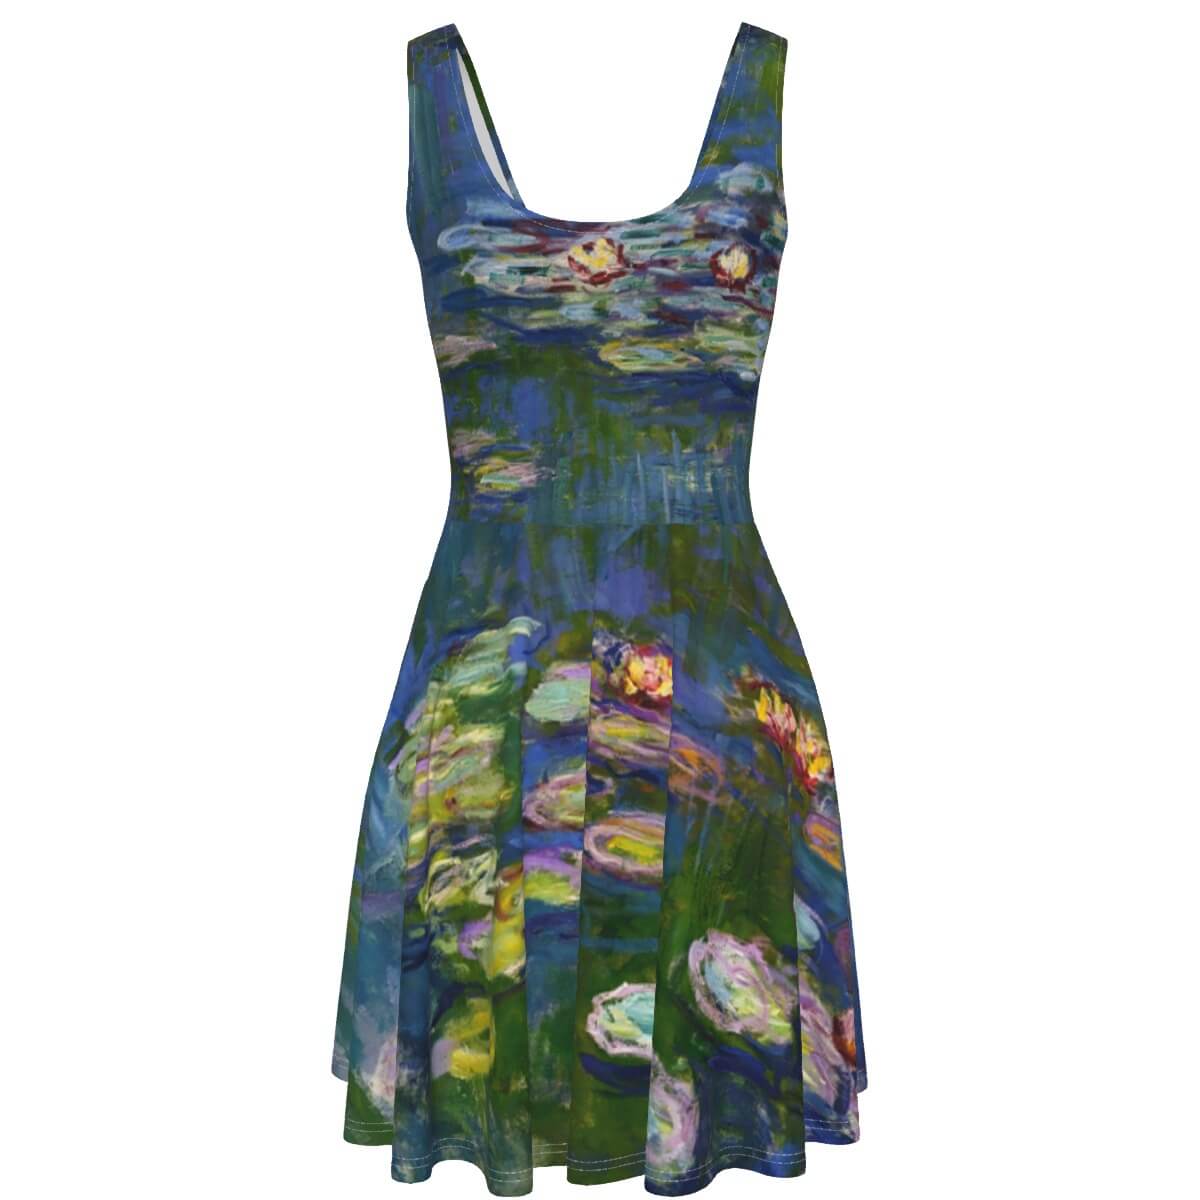 Unique tank vest dress style perfect for casual wear or a day out.